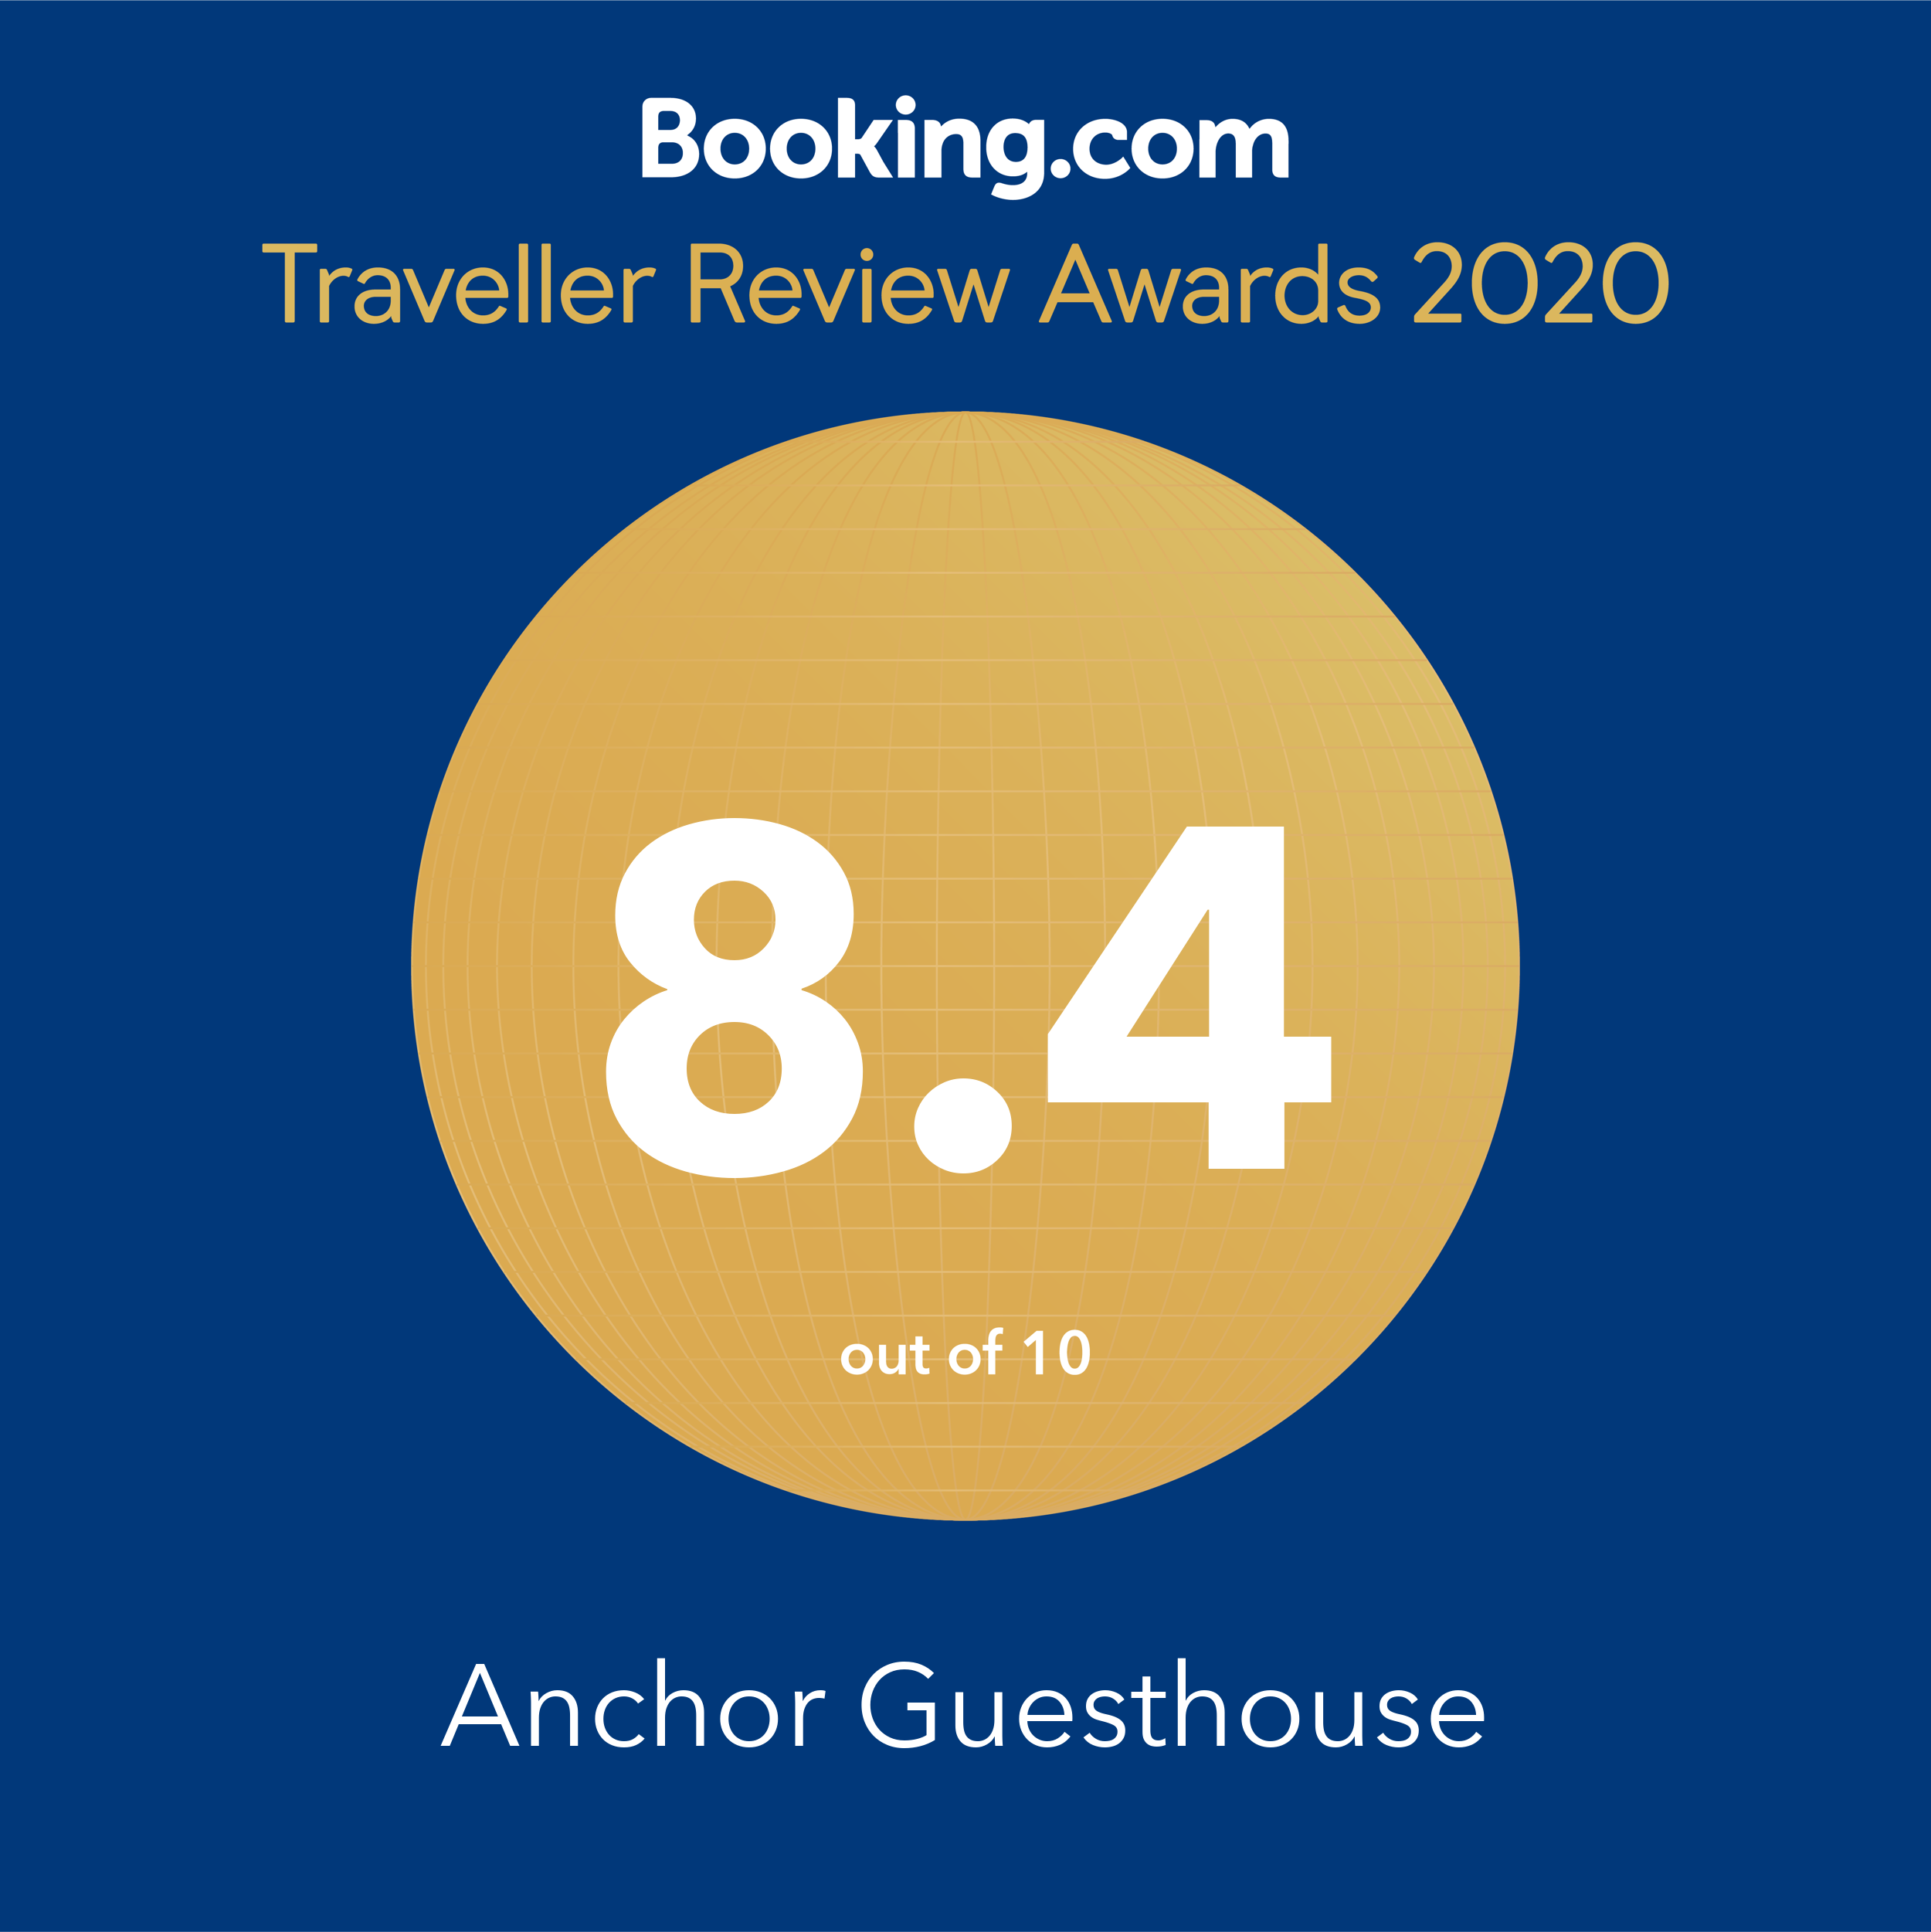 Booking.com 2020 Traveller Review Awards for Anchor Guesthouse. 8.4 out of 10 rating.